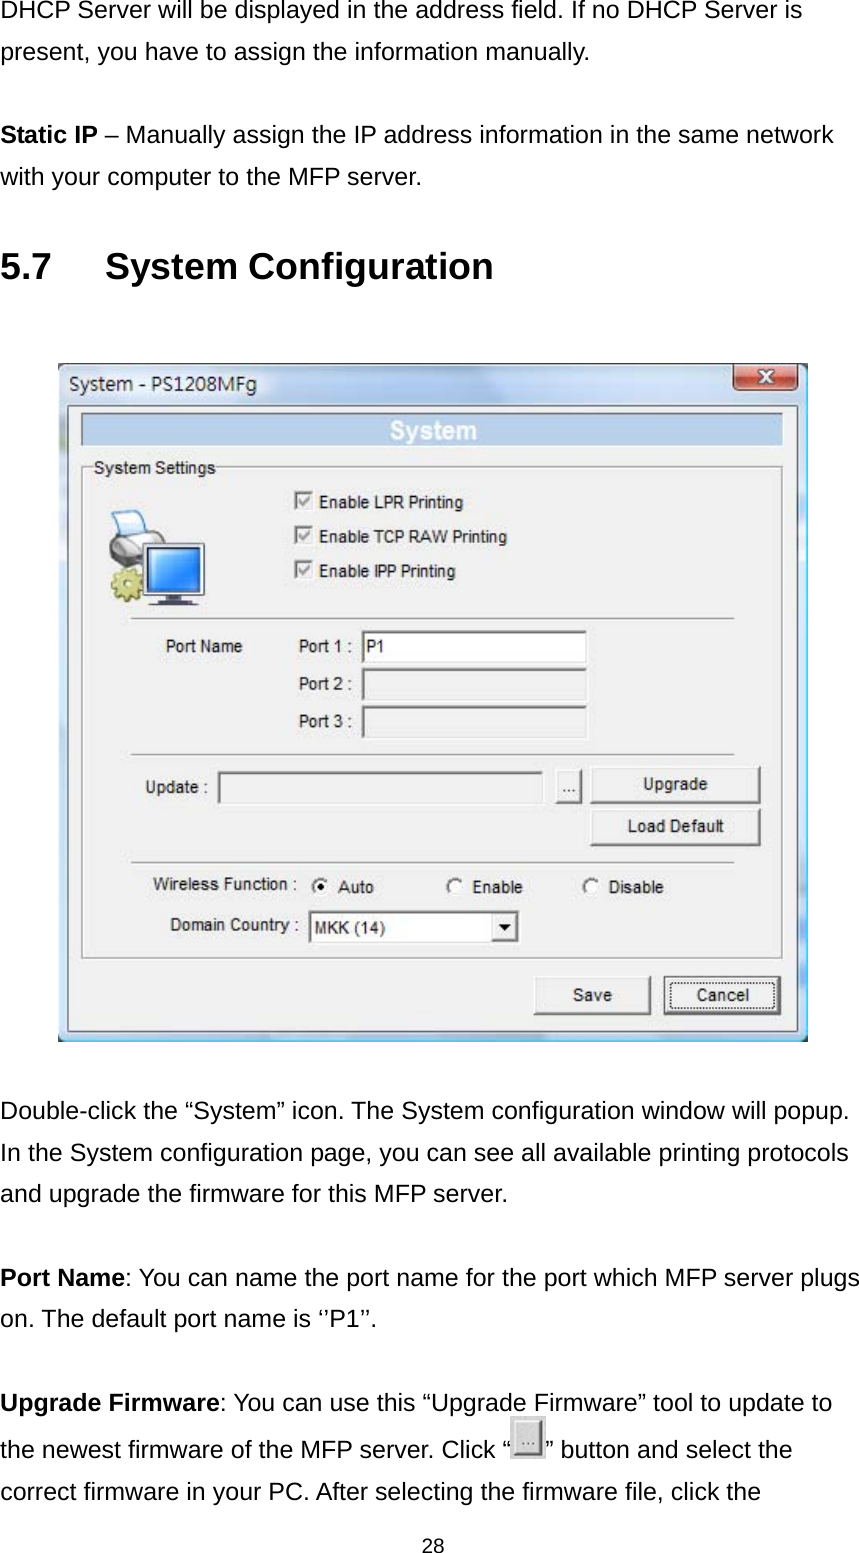 28 DHCP Server will be displayed in the address field. If no DHCP Server is present, you have to assign the information manually.  Static IP – Manually assign the IP address information in the same network with your computer to the MFP server.    5.7   System Configuration    Double-click the “System” icon. The System configuration window will popup. In the System configuration page, you can see all available printing protocols and upgrade the firmware for this MFP server.  Port Name: You can name the port name for the port which MFP server plugs on. The default port name is ‘’P1’’.  Upgrade Firmware: You can use this “Upgrade Firmware” tool to update to the newest firmware of the MFP server. Click “ ” button and select the correct firmware in your PC. After selecting the firmware file, click the 